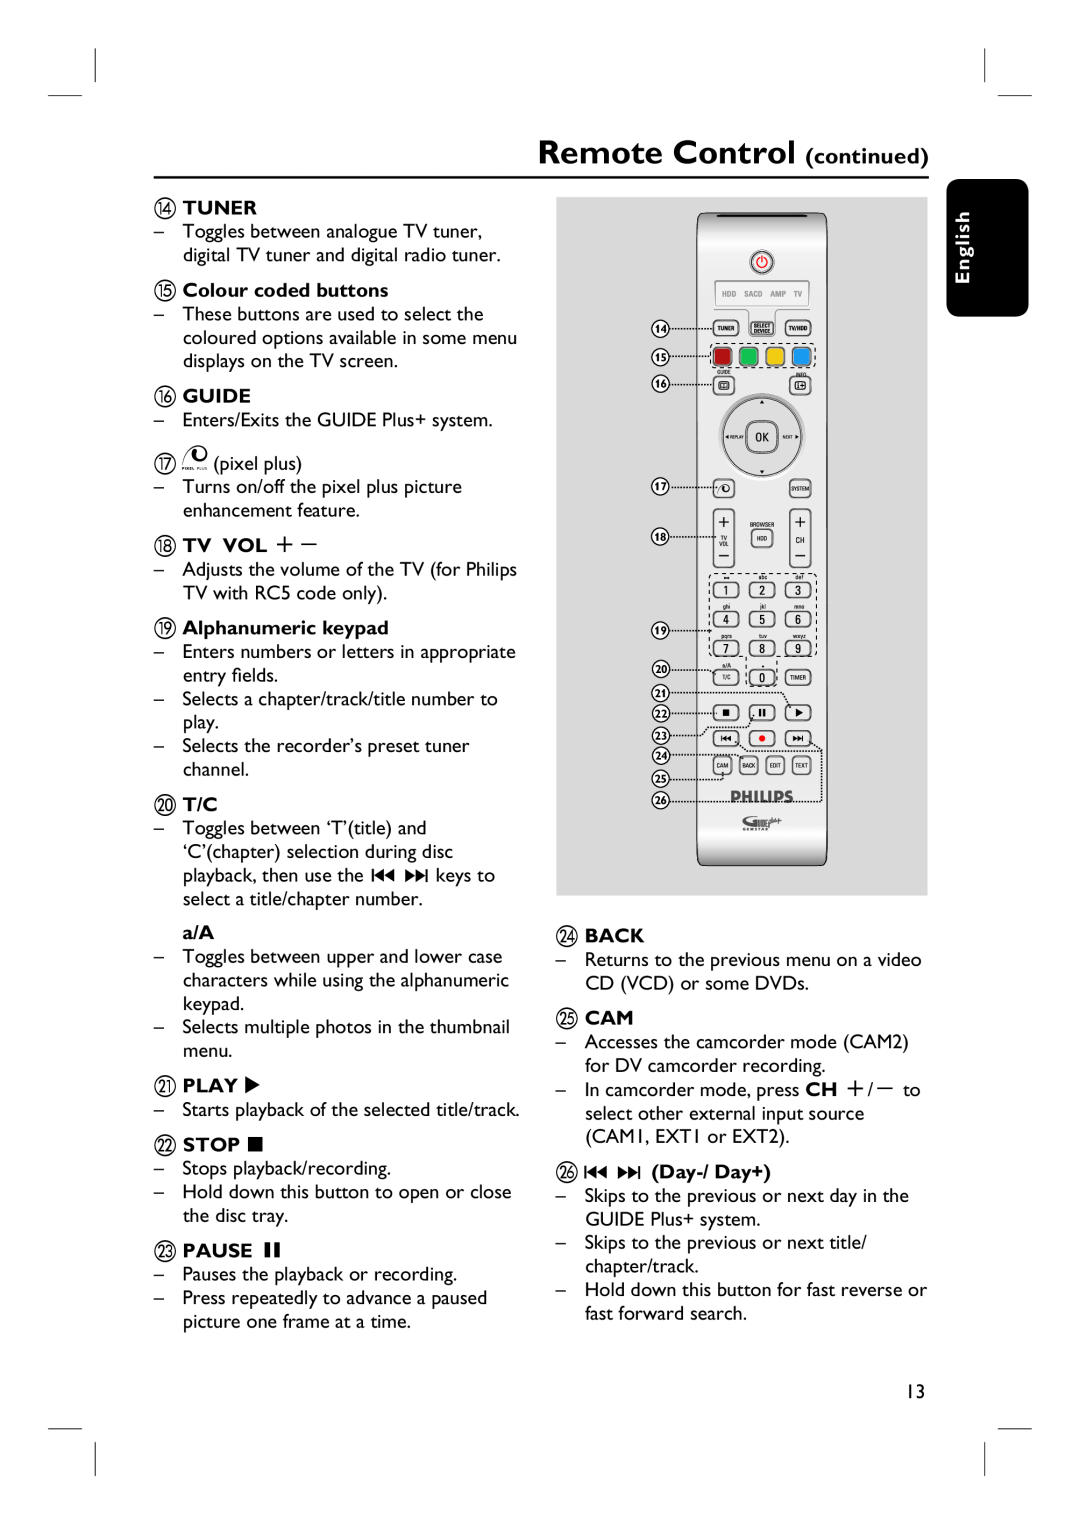 Philips DVDR3360H Remote Control continued, n TUNER, o Colour coded buttons, p GUIDE, r TV VOL +, s Alphanumeric keypad 